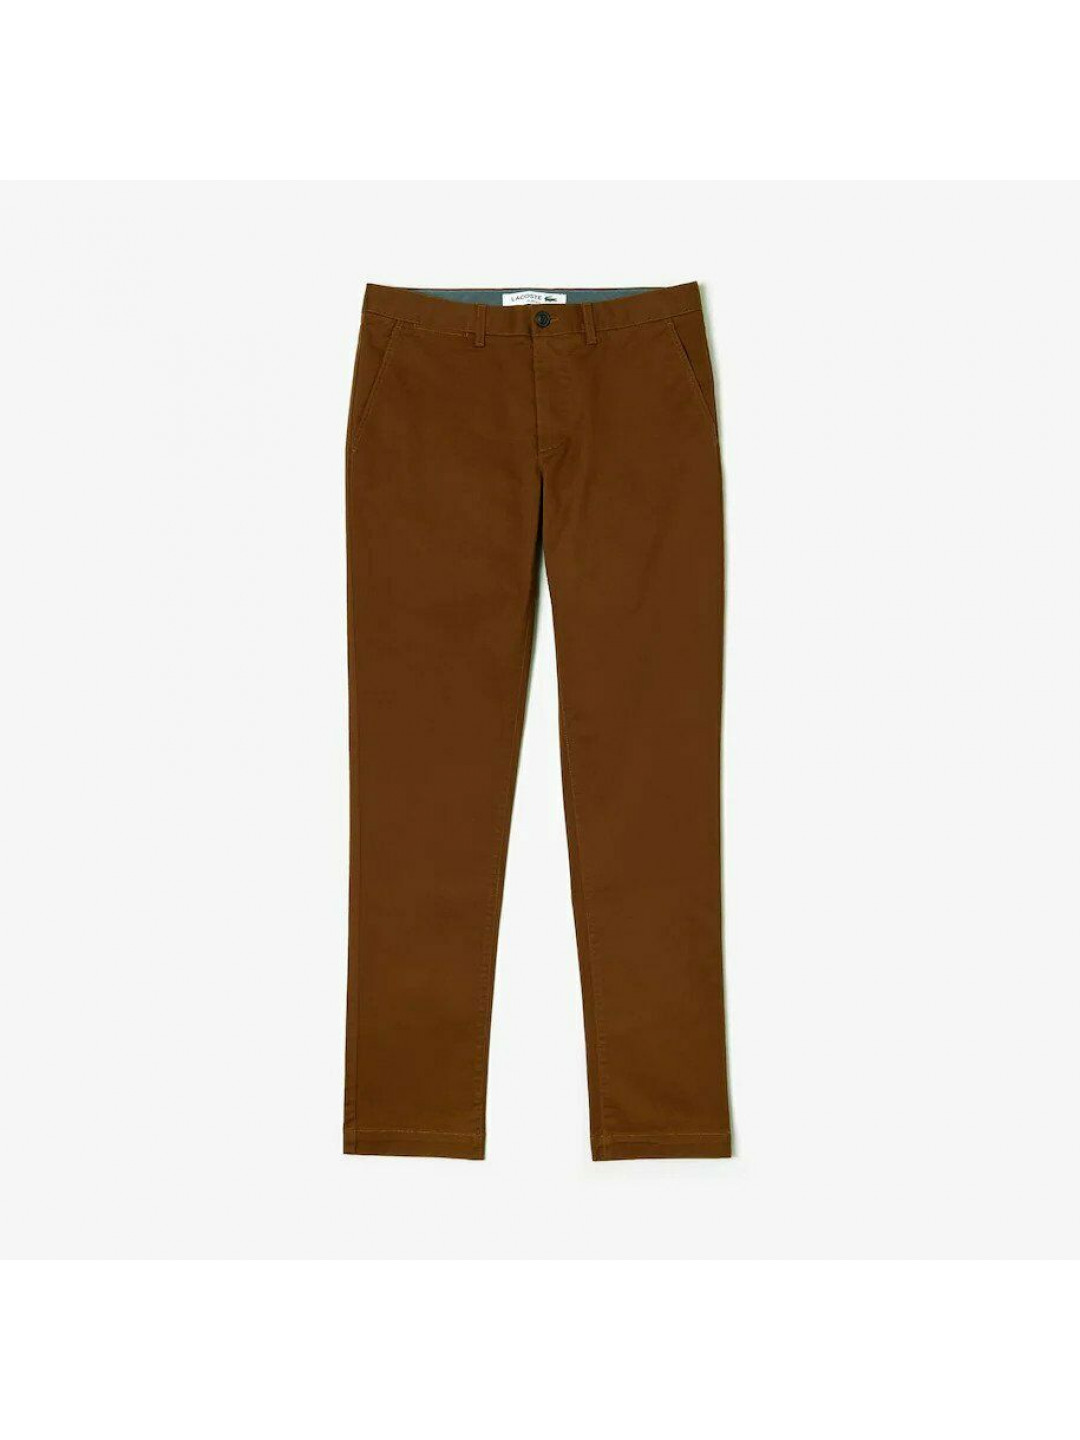 New Men Lacoste Smart Fit Stretch Gabardine Chinos Pants | Brown